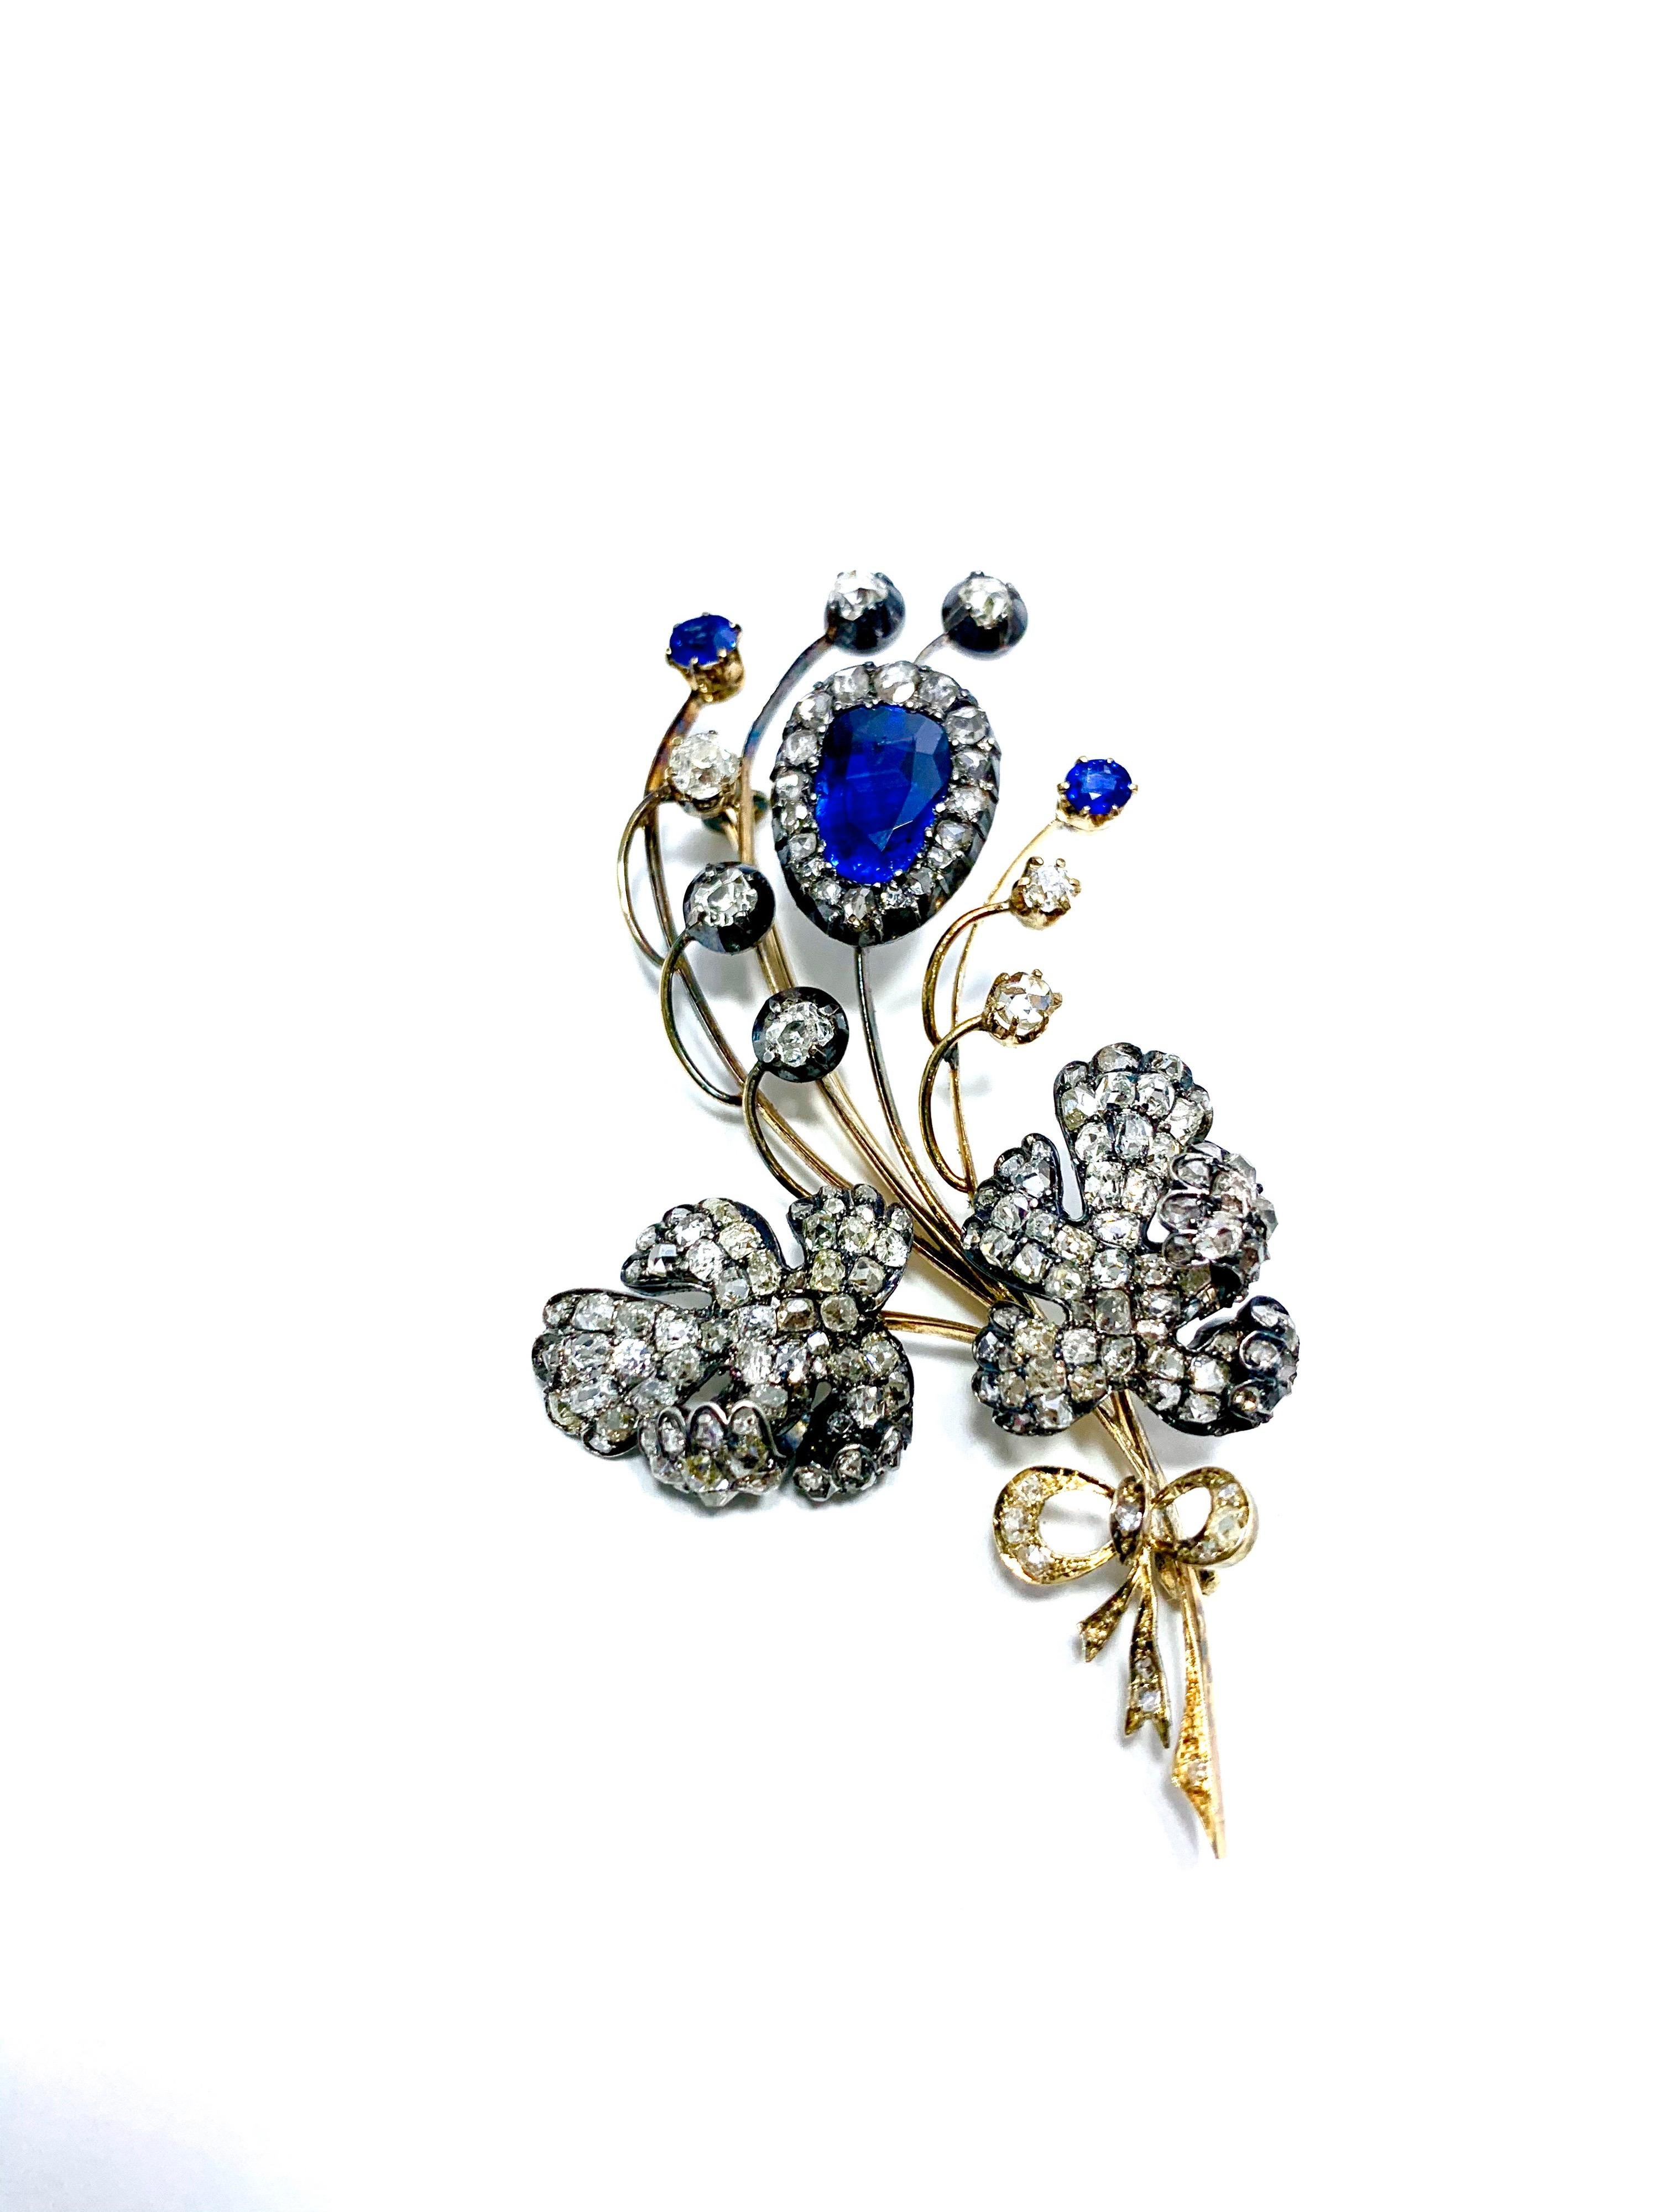 This is a gorgeous one of a kind Edwardian era Sapphire and Diamond silver over gold floral bouquet brooch.  The main royal blue pear shape Sapphire is 3.02 carats, accompanied by two round Sapphires totaling 0.40 carts.  The floral design contains